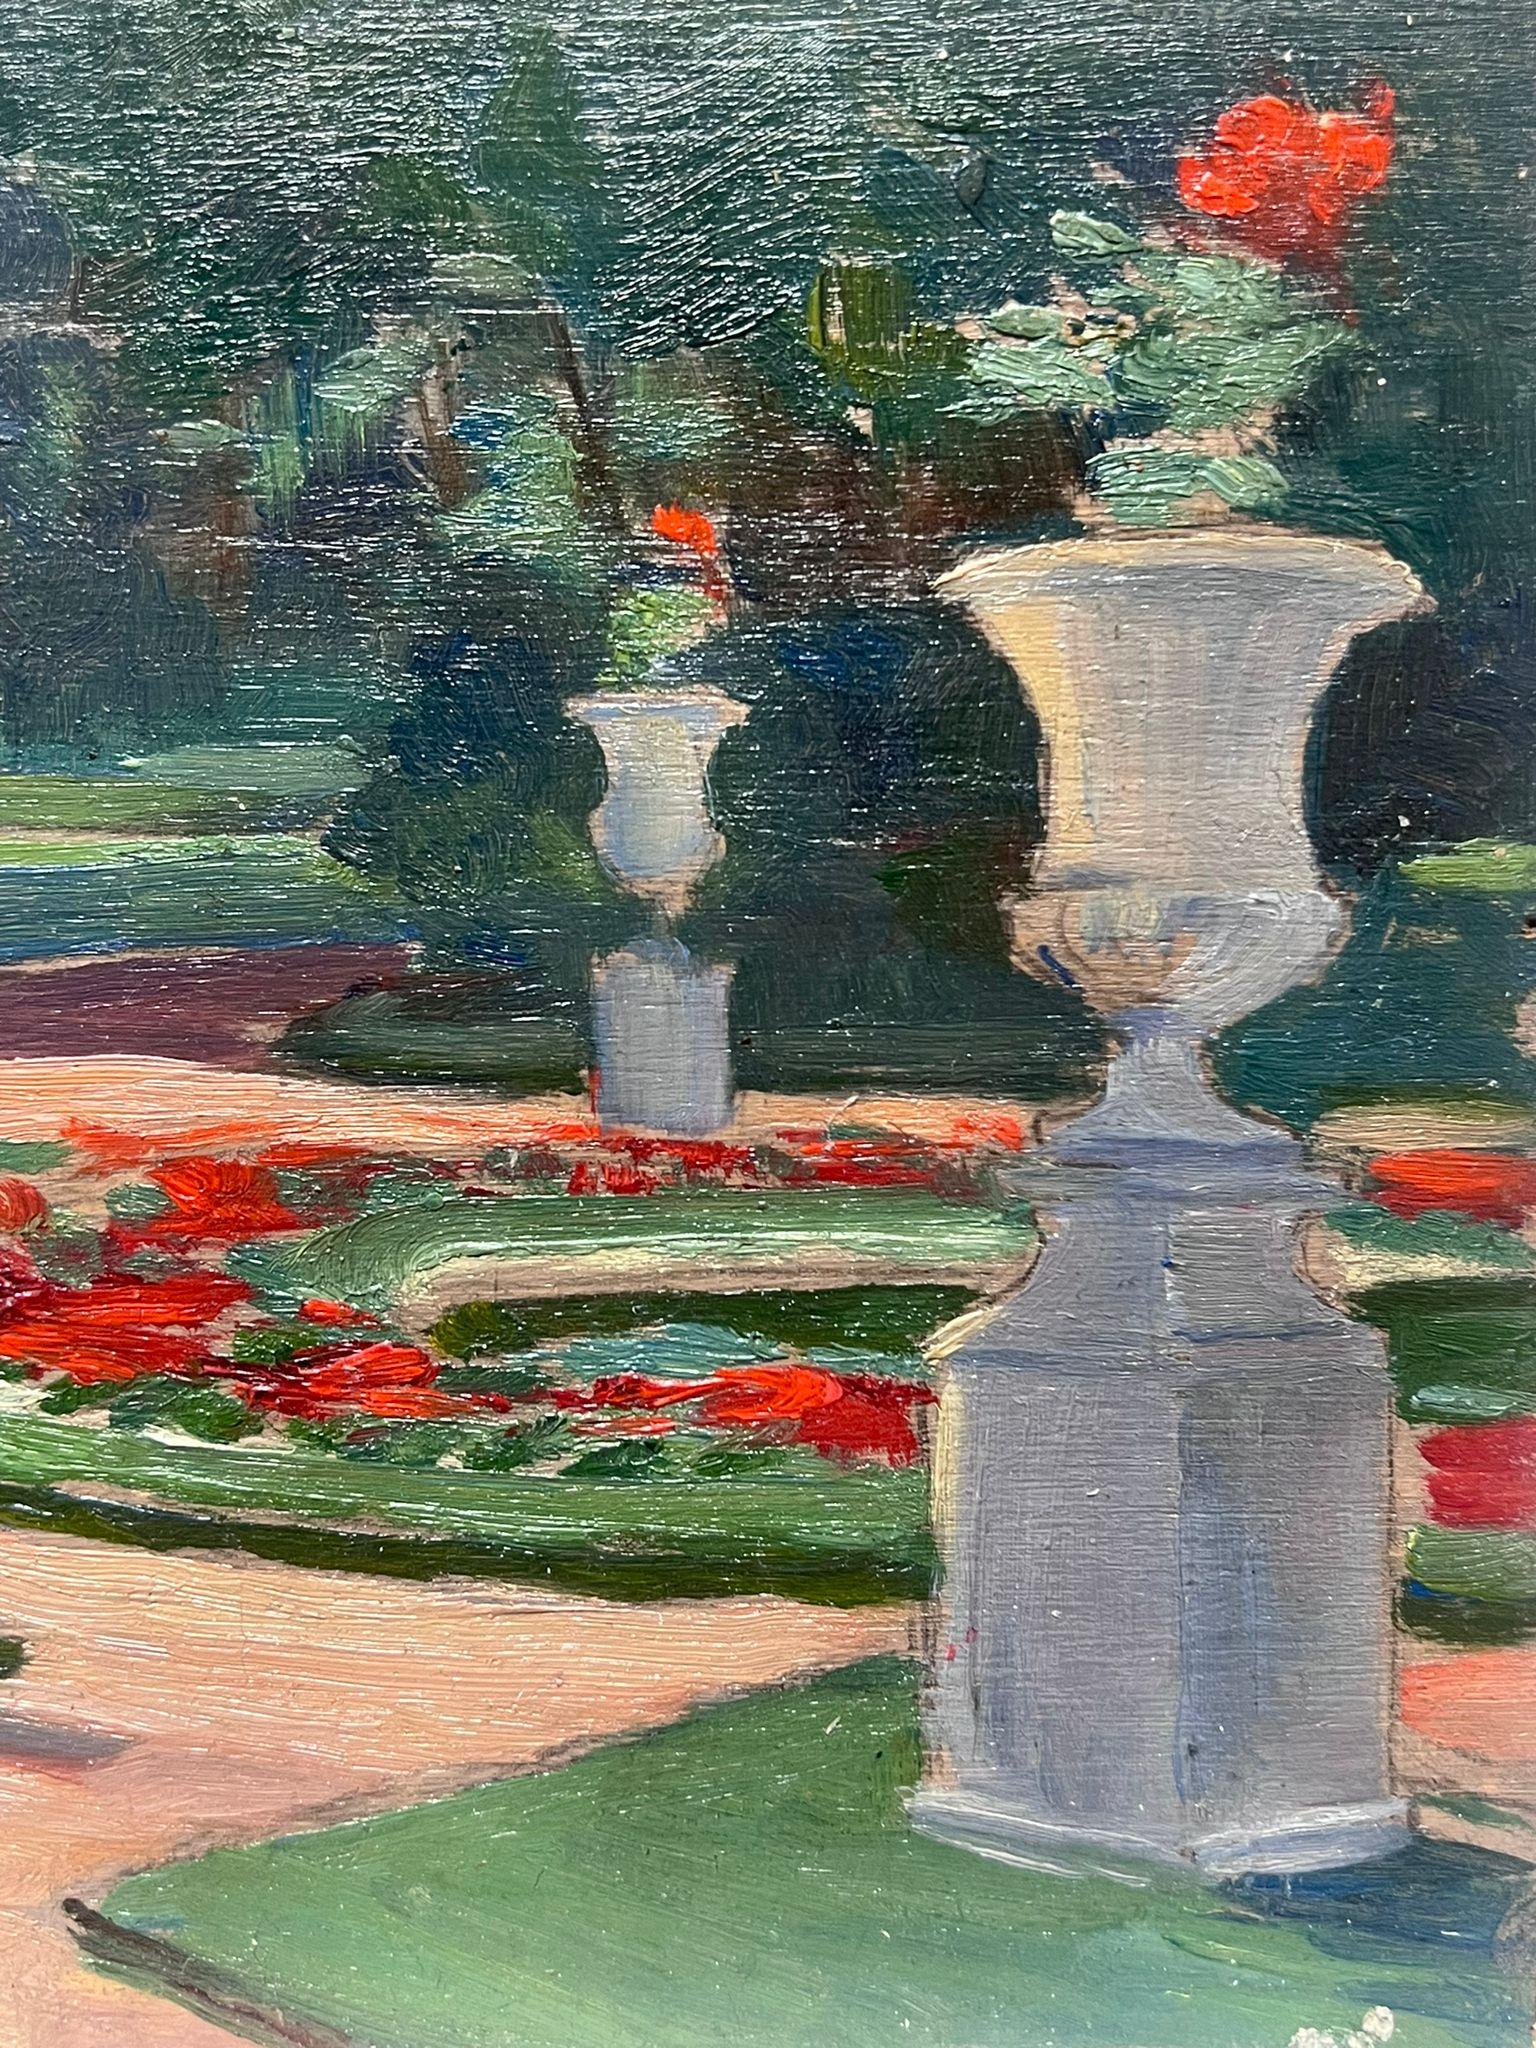 The French Park Landscape
by Louise Alix (French, 1888-1980) *see notes below
provenance stamp to the back 
signed oil painting on board, unframed
measures: 7.5 high by 9.5 inches wide
condition: overall very good and sound, a few scuffs and marks